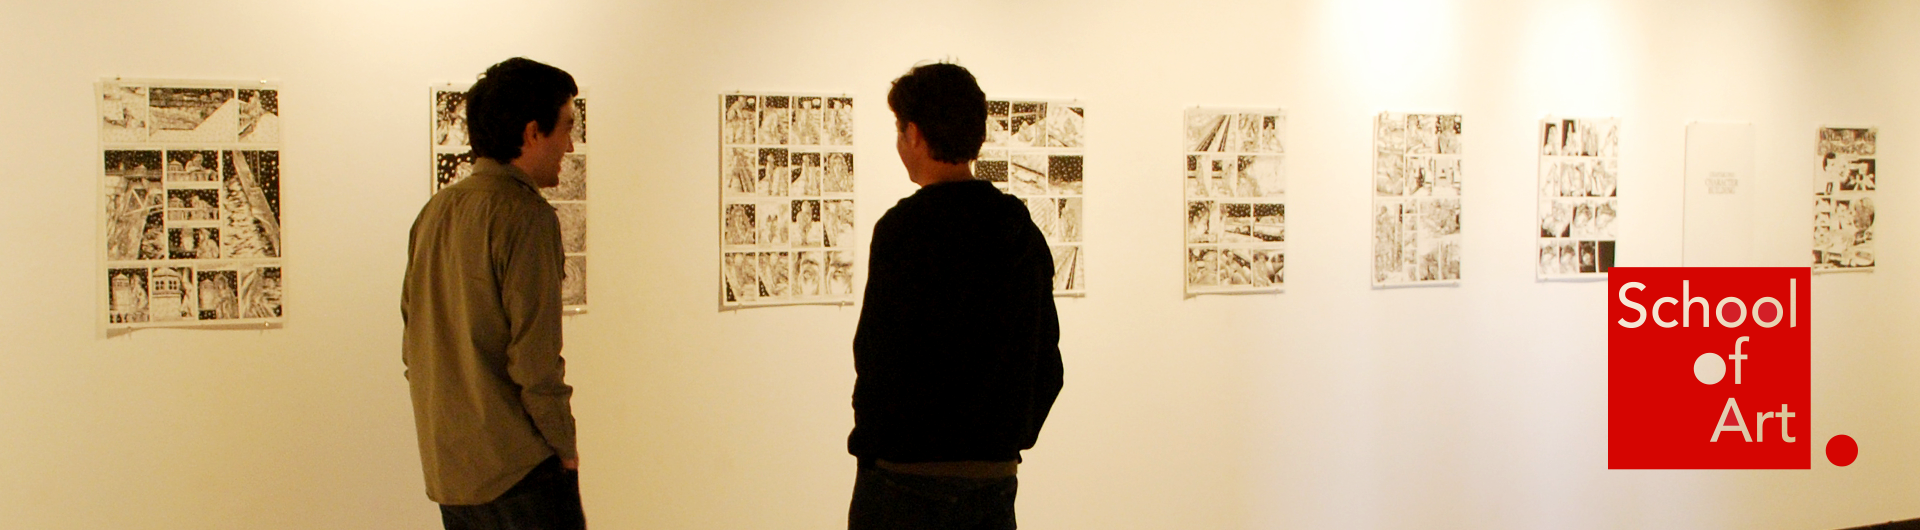 Two students looking at art together in a gallery.